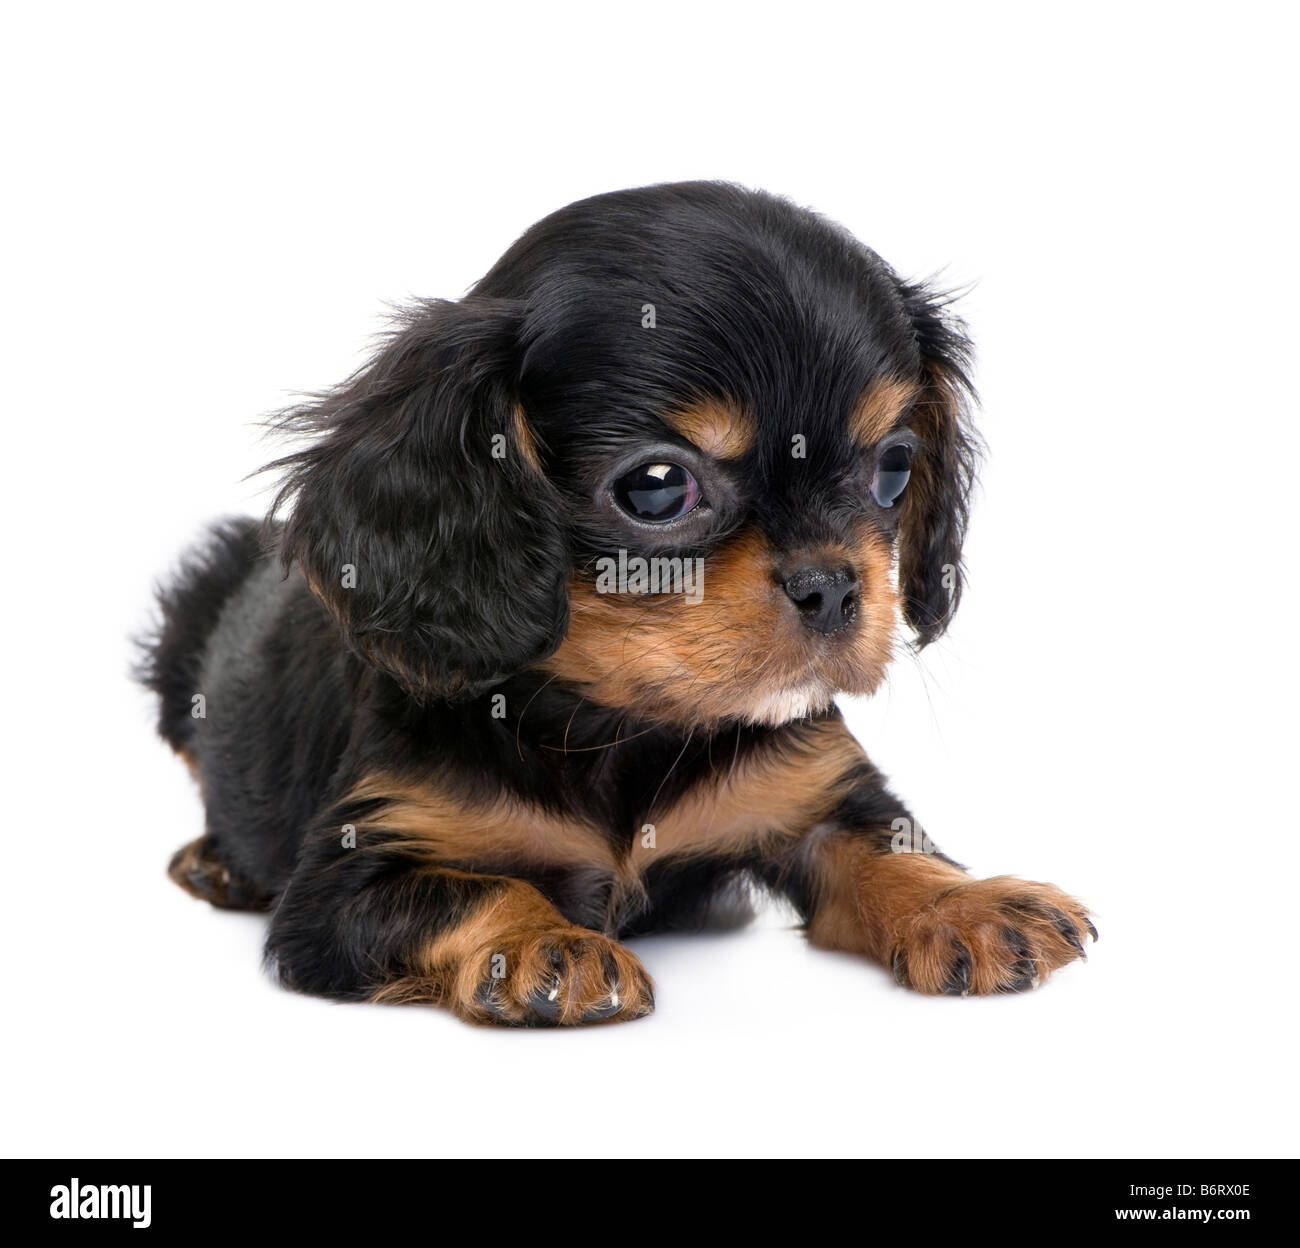 Cavalier dog Cut Out Stock Images & Pictures - Page 3 - Alamy